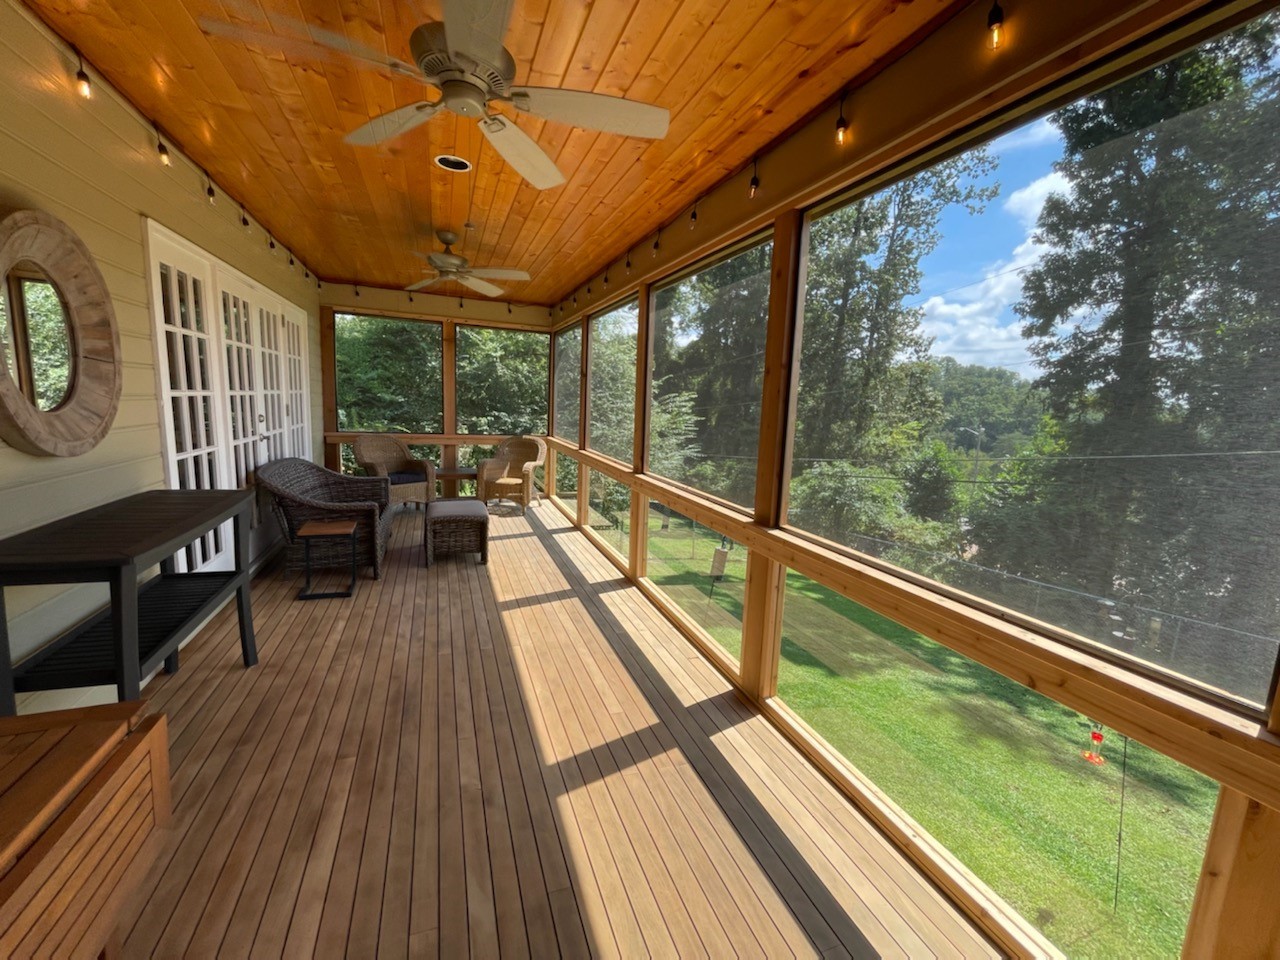 updates to existing screened porch